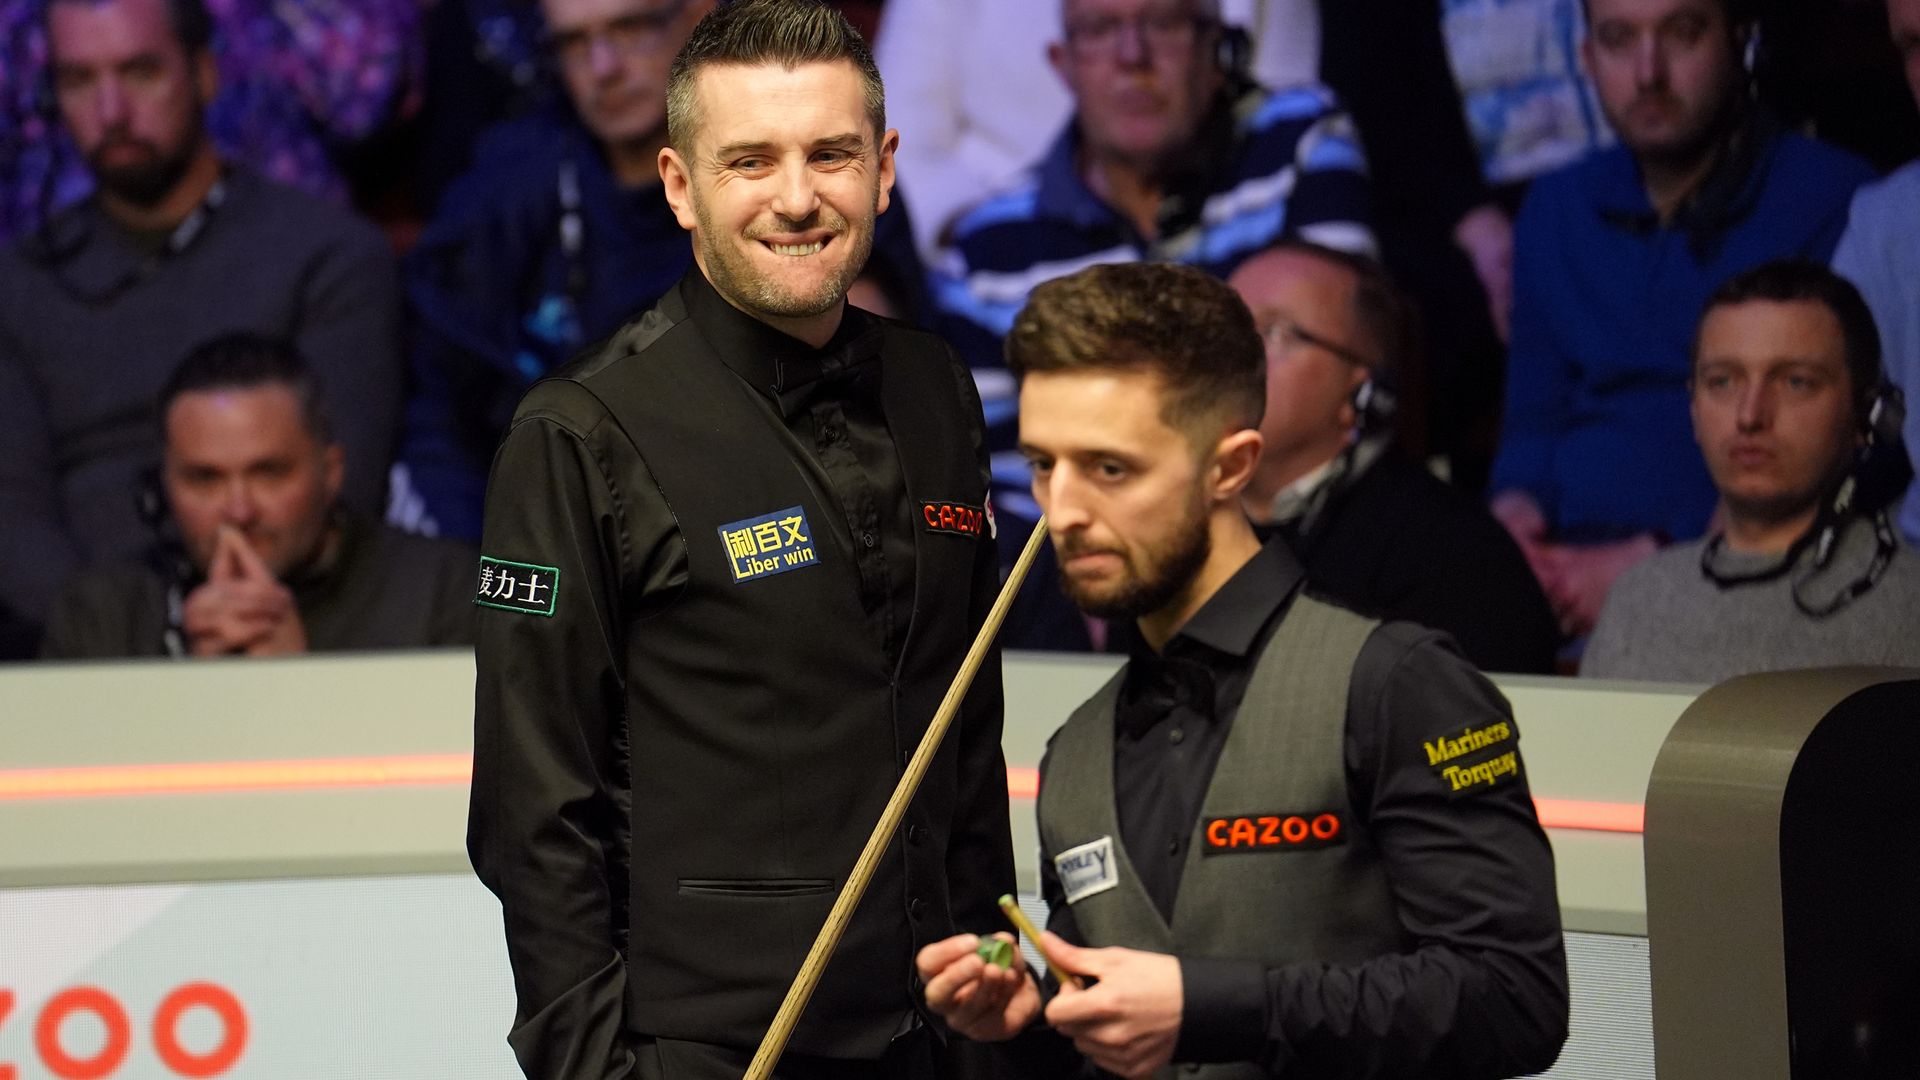 Selby considers retirement after 'pathetic' exit from Worlds